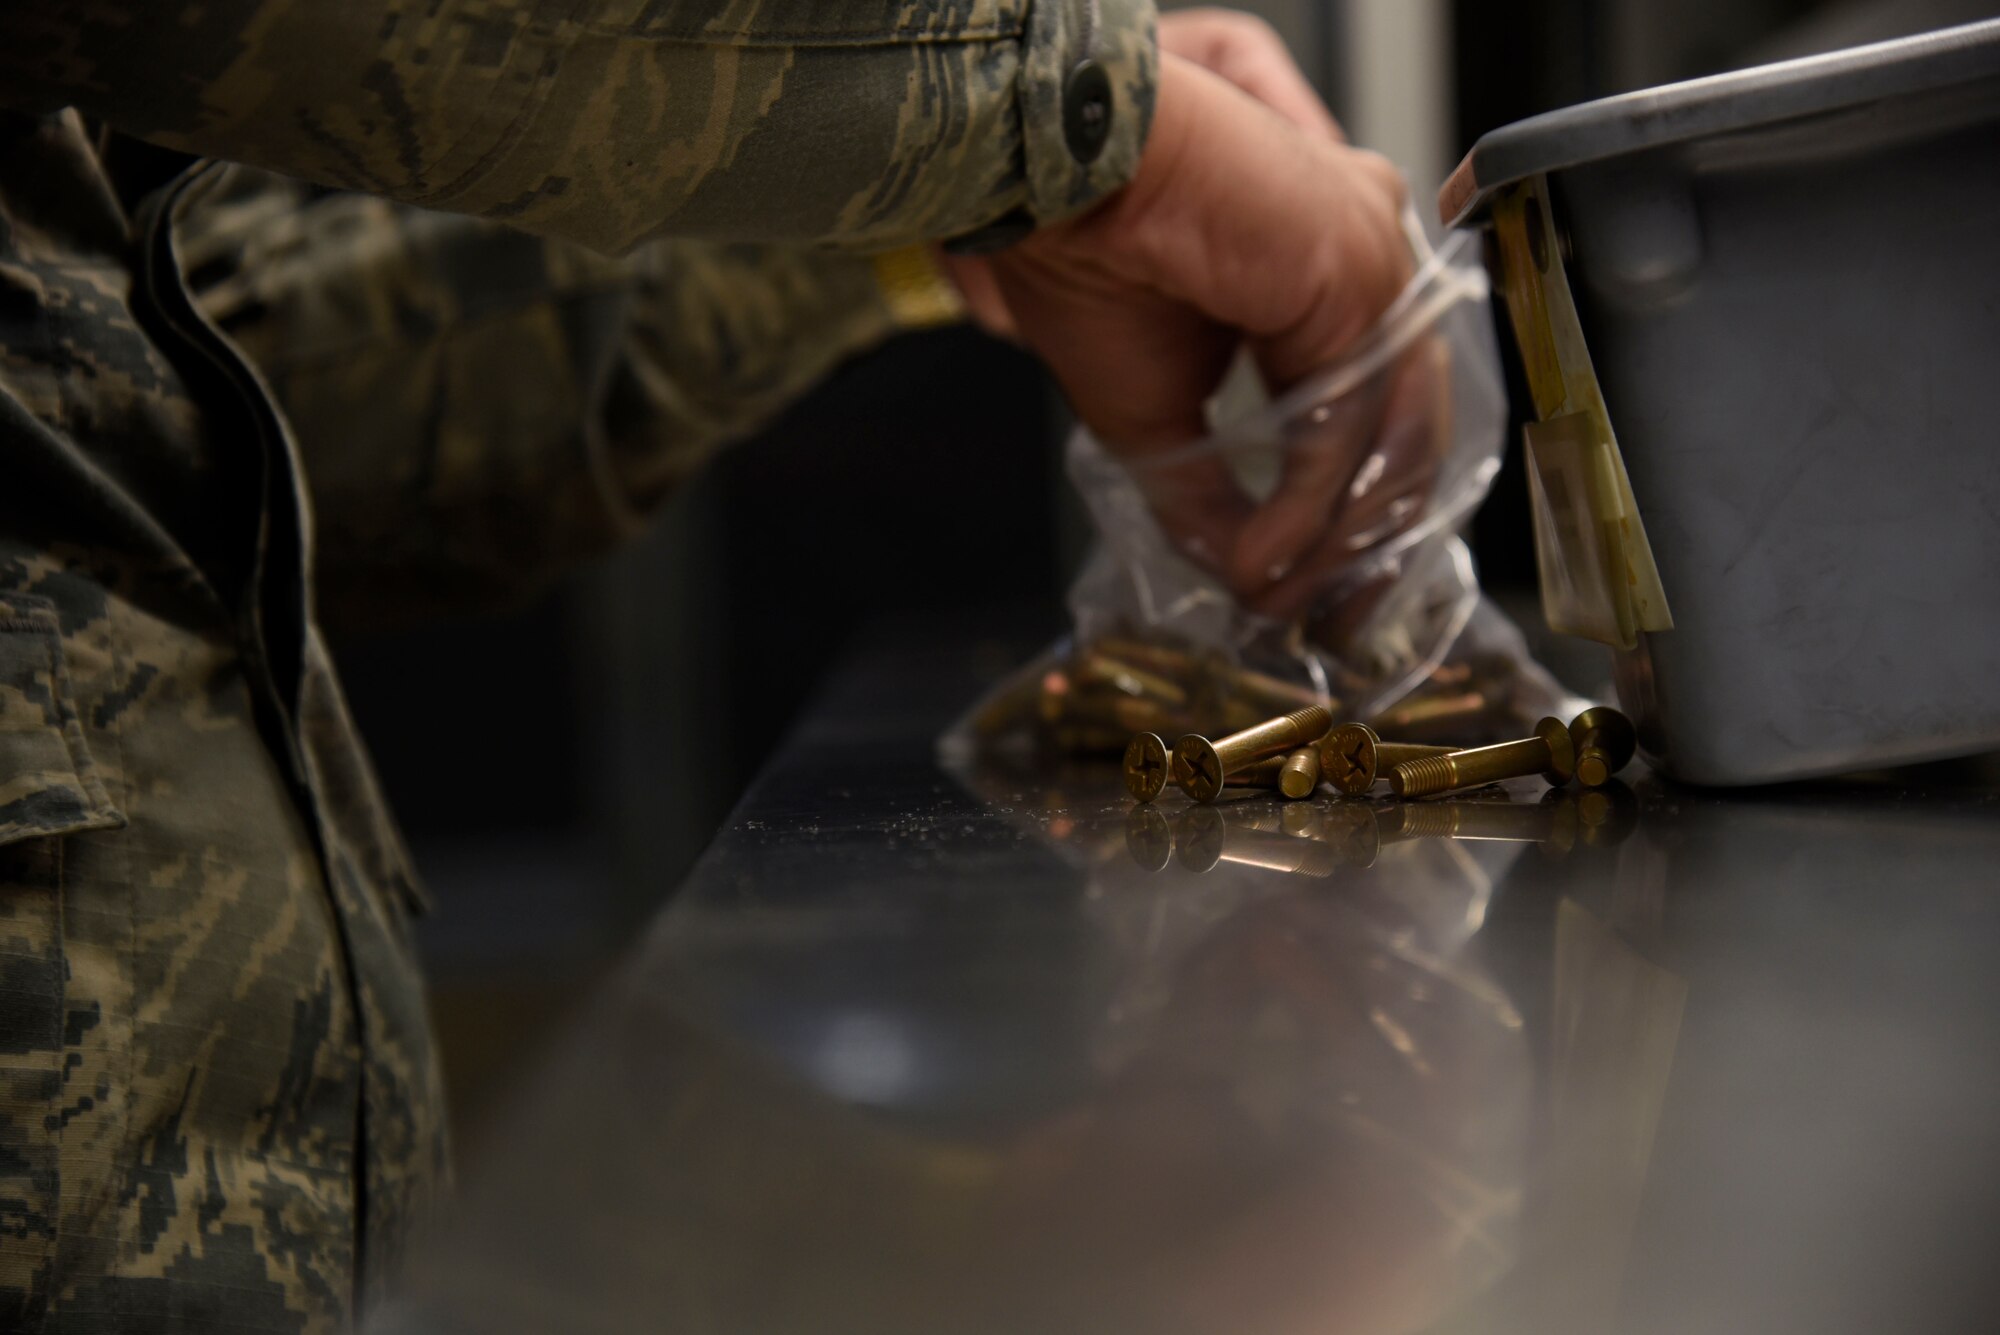 U.S. Air Force Airman 1st Class Samuel San Pedro, an aircraft parts store apprentice with the 35th Logistics Readiness Squadron, inventories aircraft screws at Misawa Air Base, Japan, Sept. 20, 2016. All assets are inventoried to keep track of how many parts are on hand and to ensure none have been misplaced. (U.S. Air force photo by Airman 1st Class Sadie Colbert)